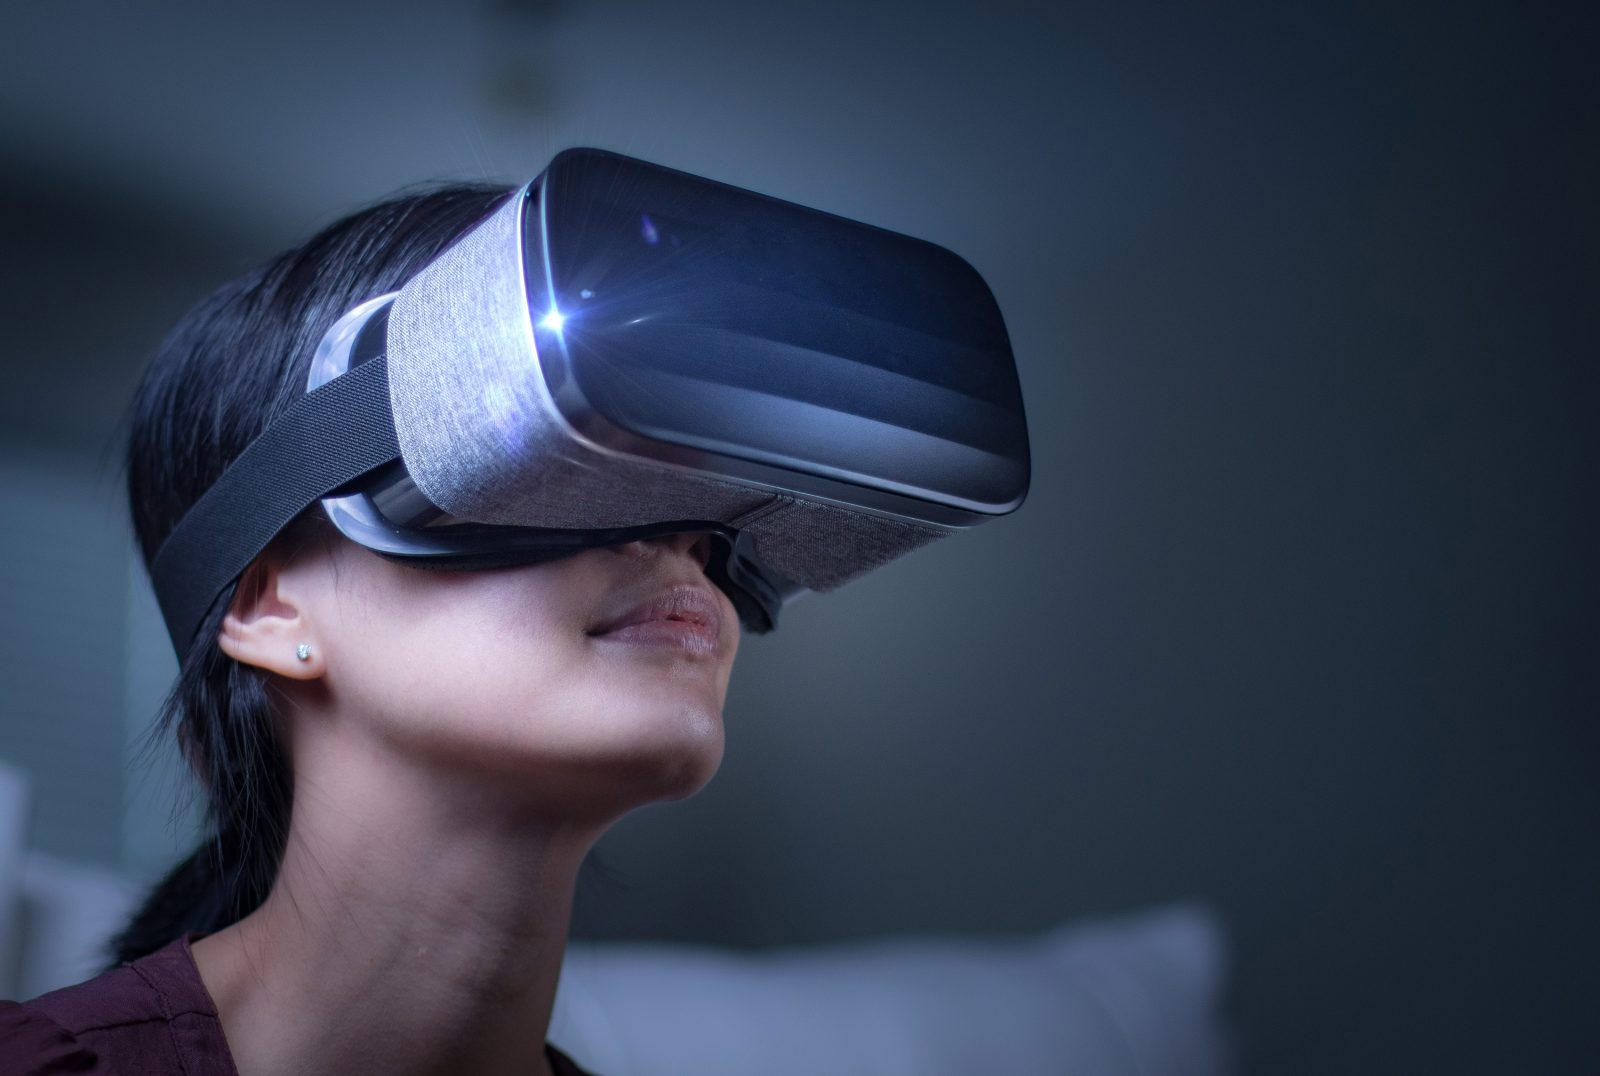 a person wearing a virtual reality headset looks up.